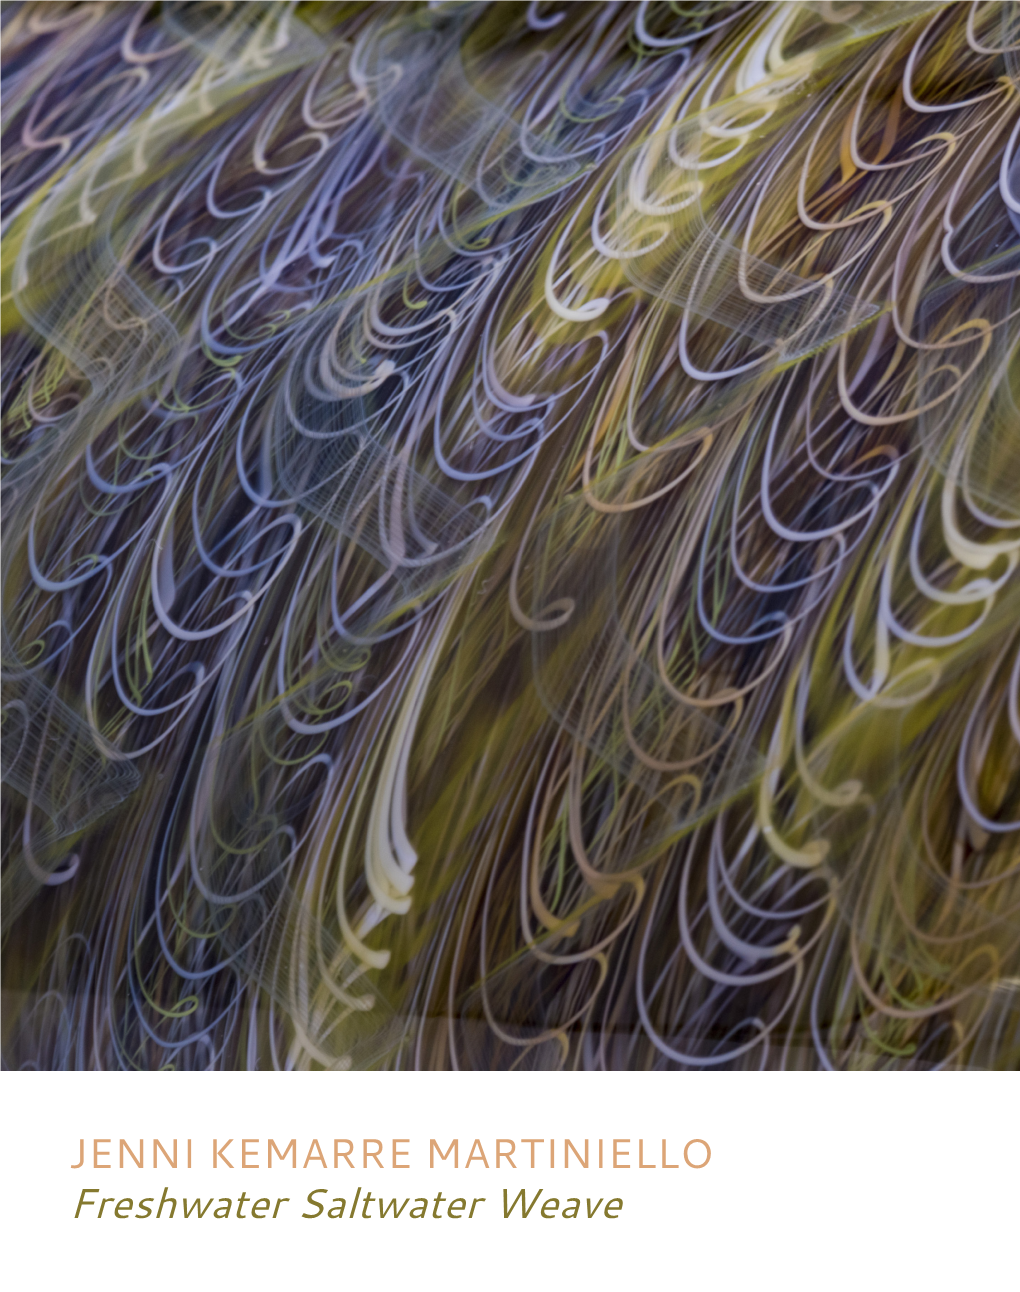 JENNI KEMARRE MARTINIELLO Freshwater Saltwater Weave Jenni Kemarre Martiniello’S Freshwater Saltwater Weave by MEL GEORGE